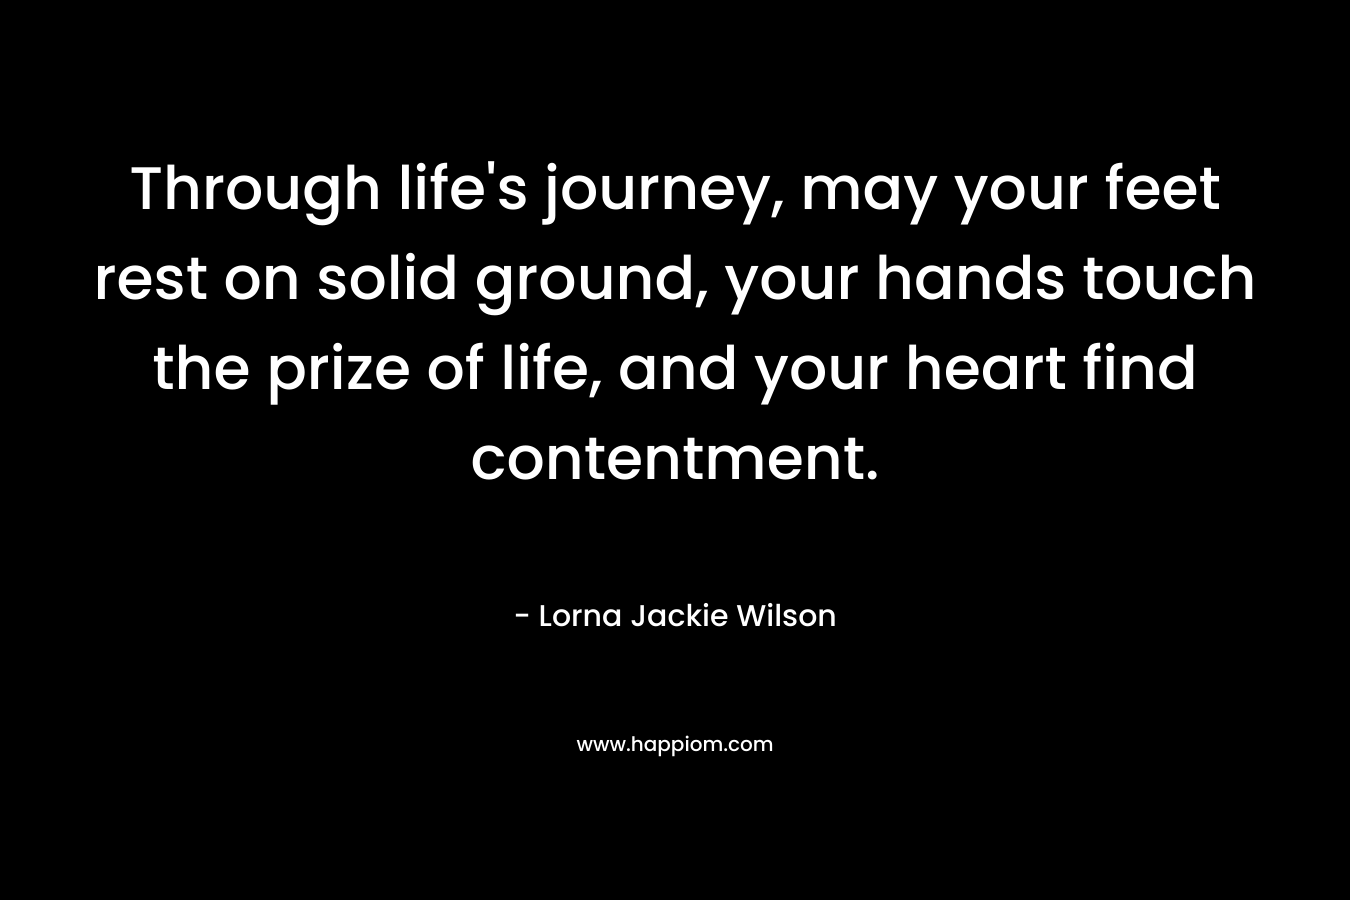 Through life's journey, may your feet rest on solid ground, your hands touch the prize of life, and your heart find contentment.